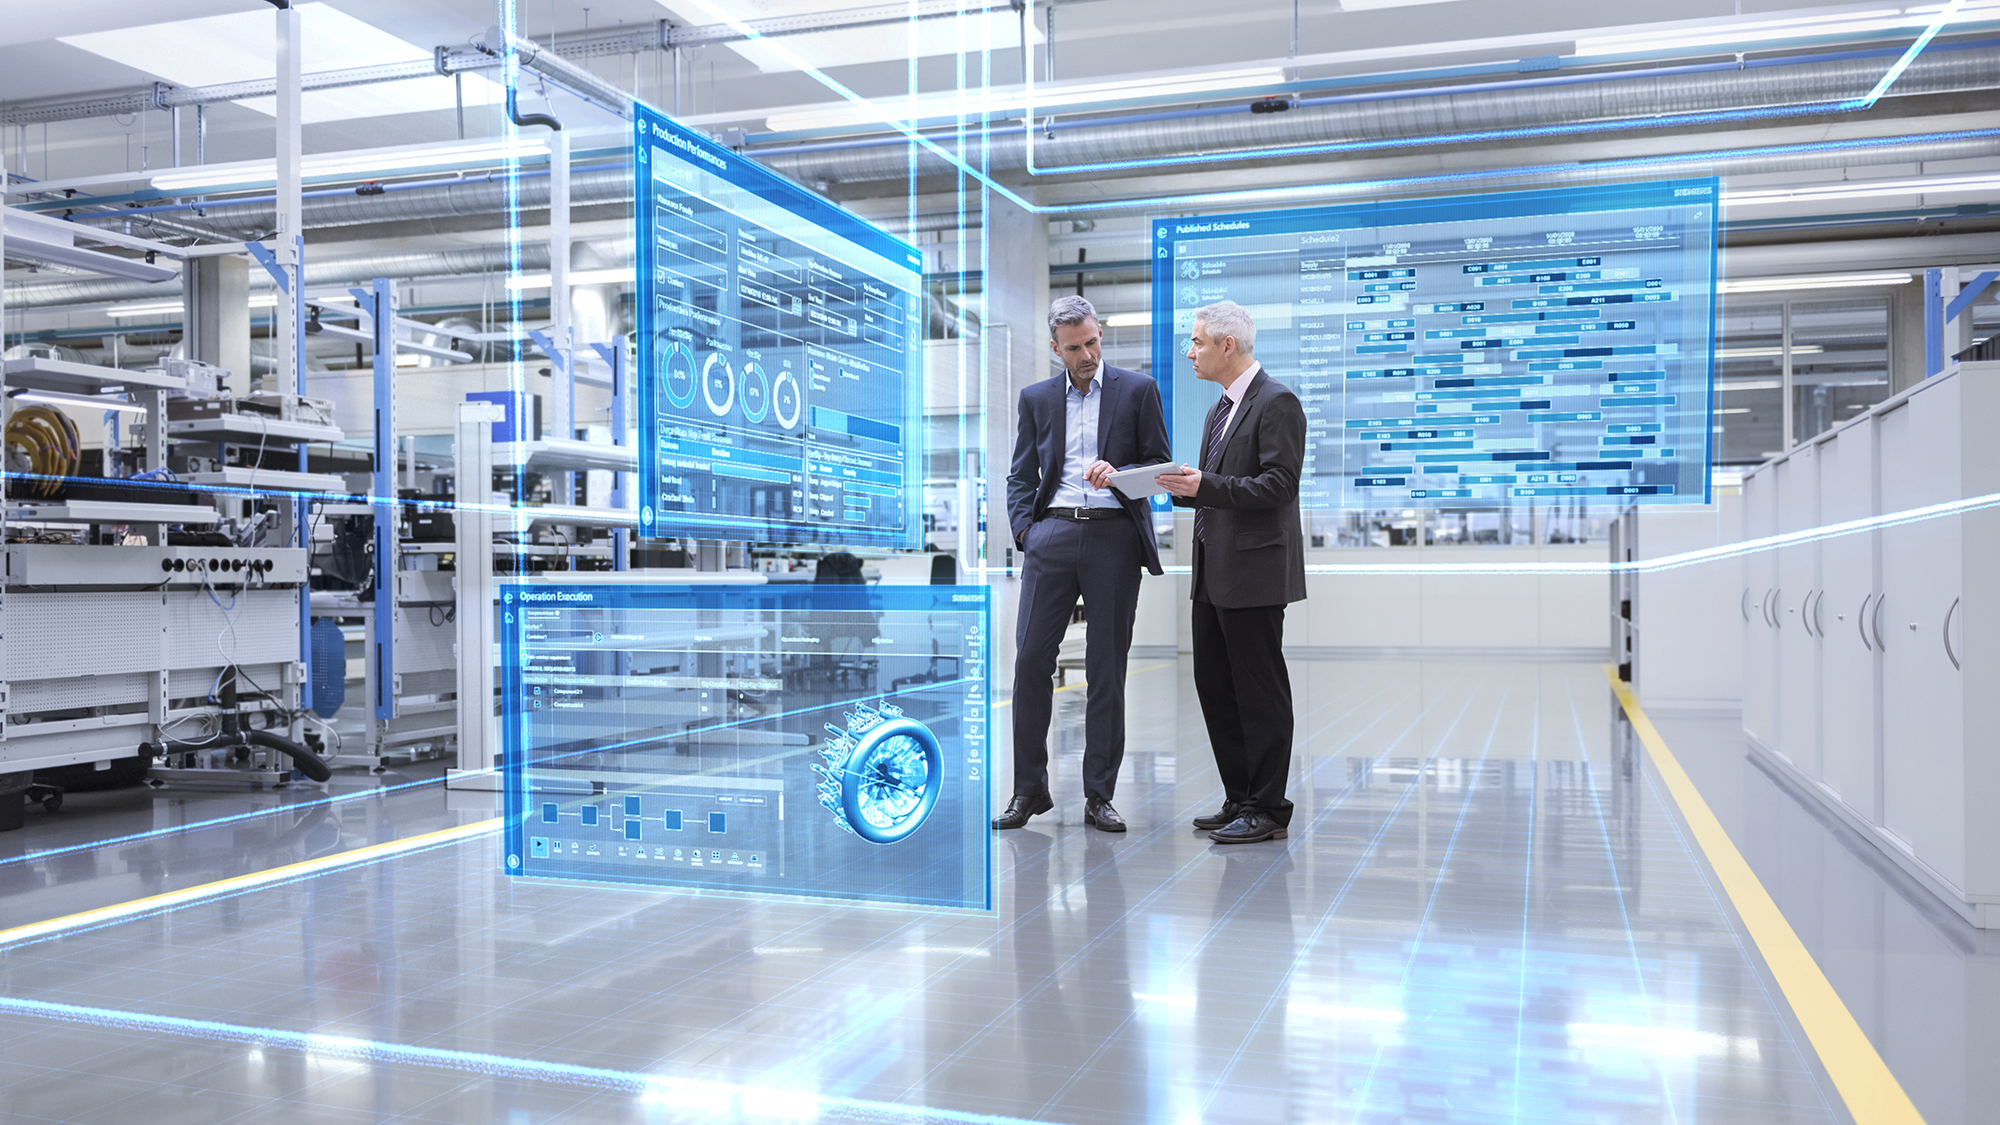 Siemens rebrands Preactor APS to Opcenter APS and launches the Siemens Opcenter Portfolio